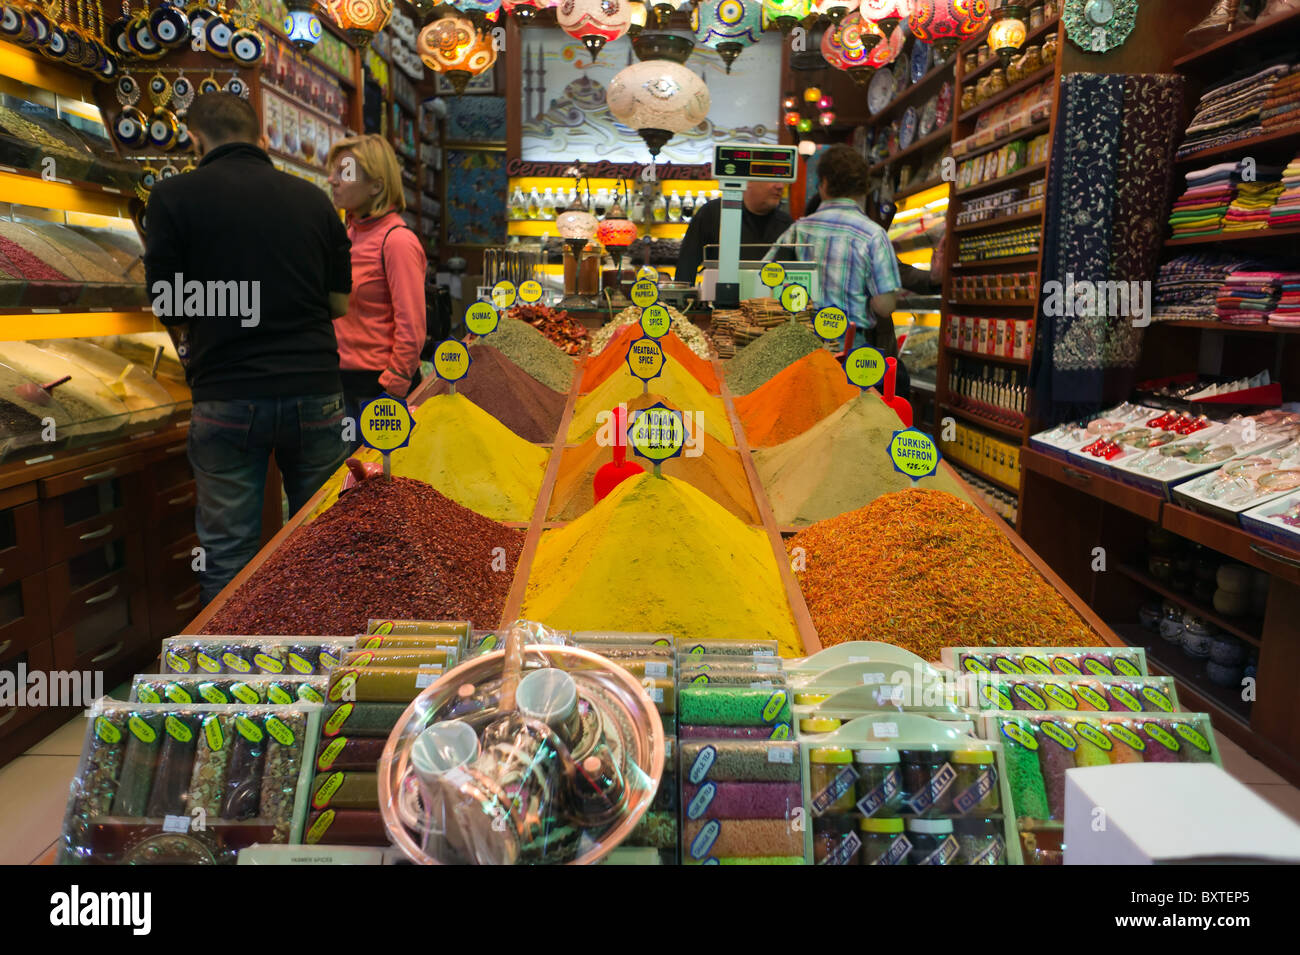 Saffron, chili and other spices for sale at The Spice bazaar, Istanbul, Turkish. Stock Photo